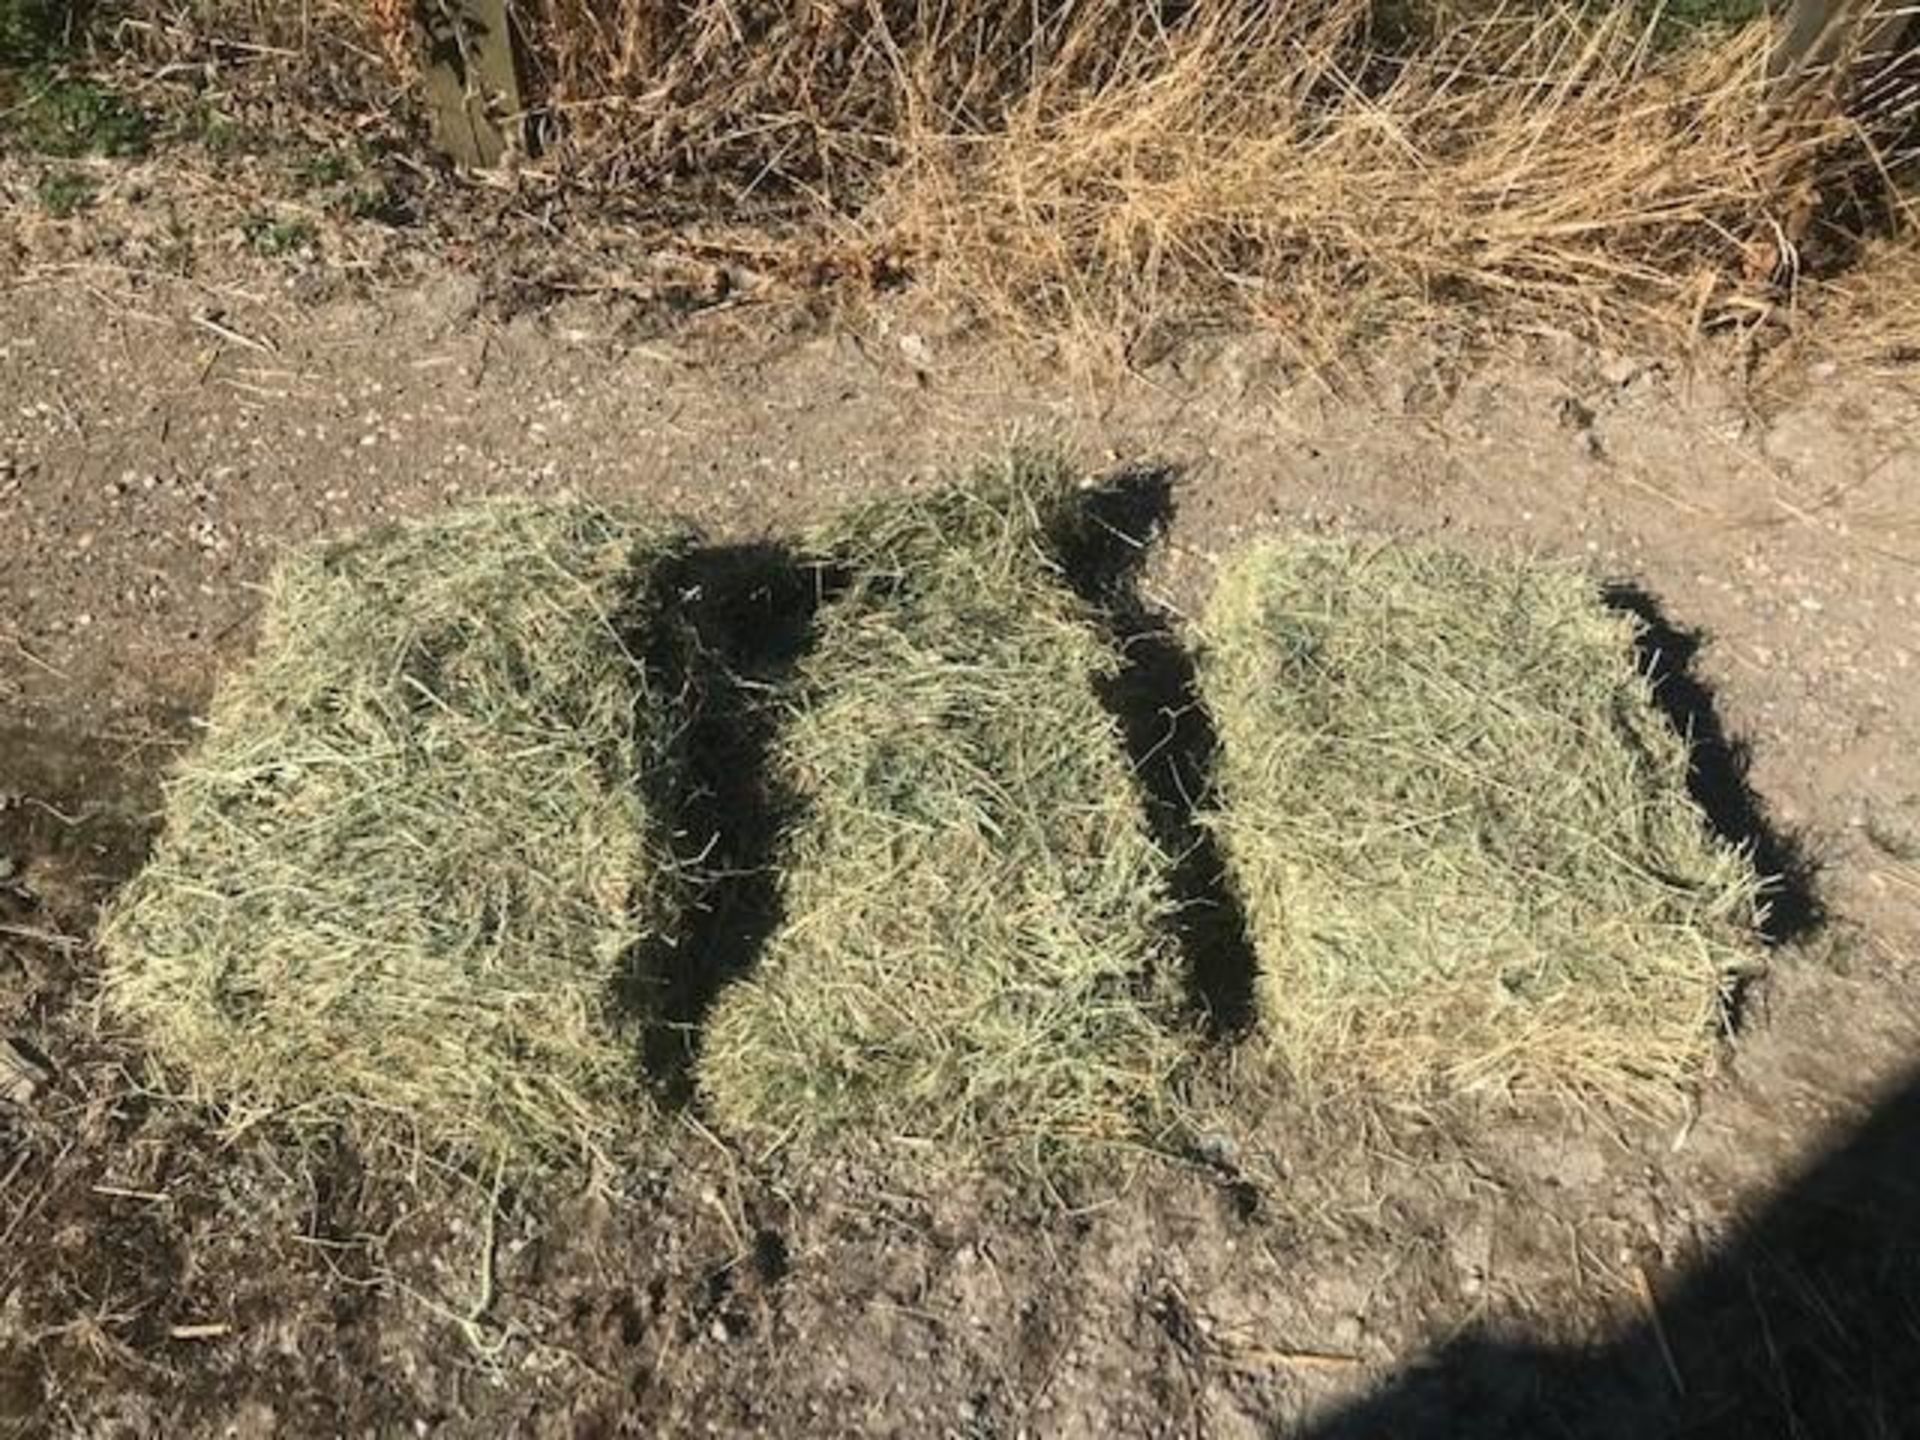 100 x 2021 Small Square Baled Hay - Image 3 of 3